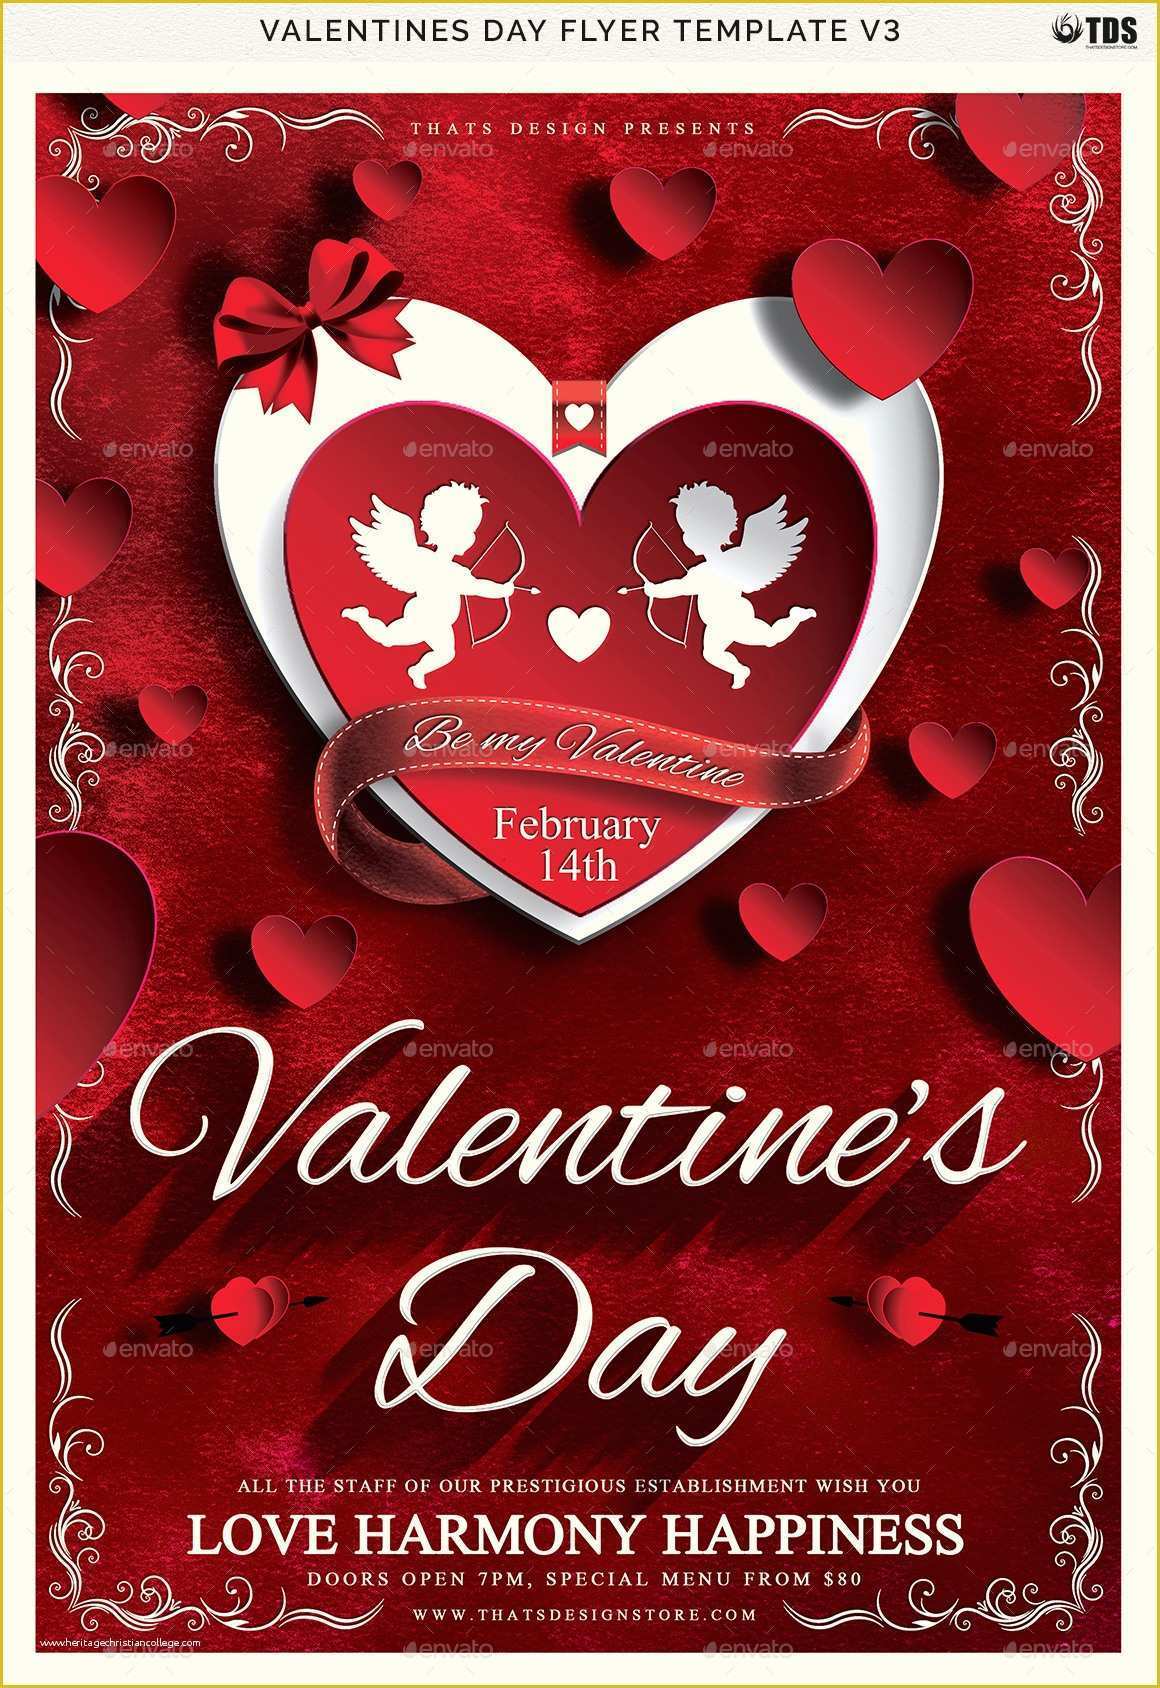 Valentine Flyer Template Free Of Valentines Day Flyer Template V3 by Lou606